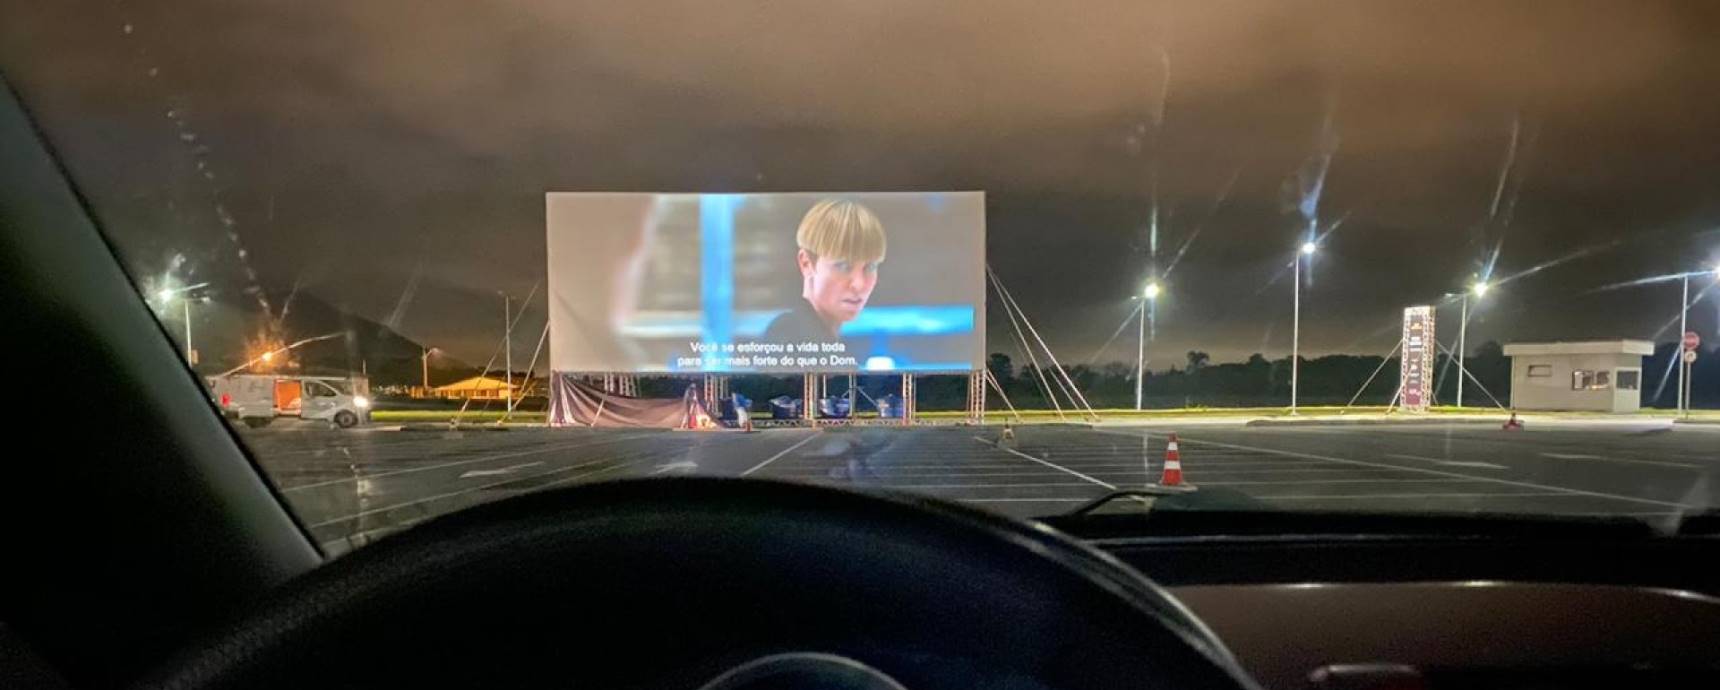 Cine Drive-in, from the Cinesystem group, arrives at Florianópolis International Airport